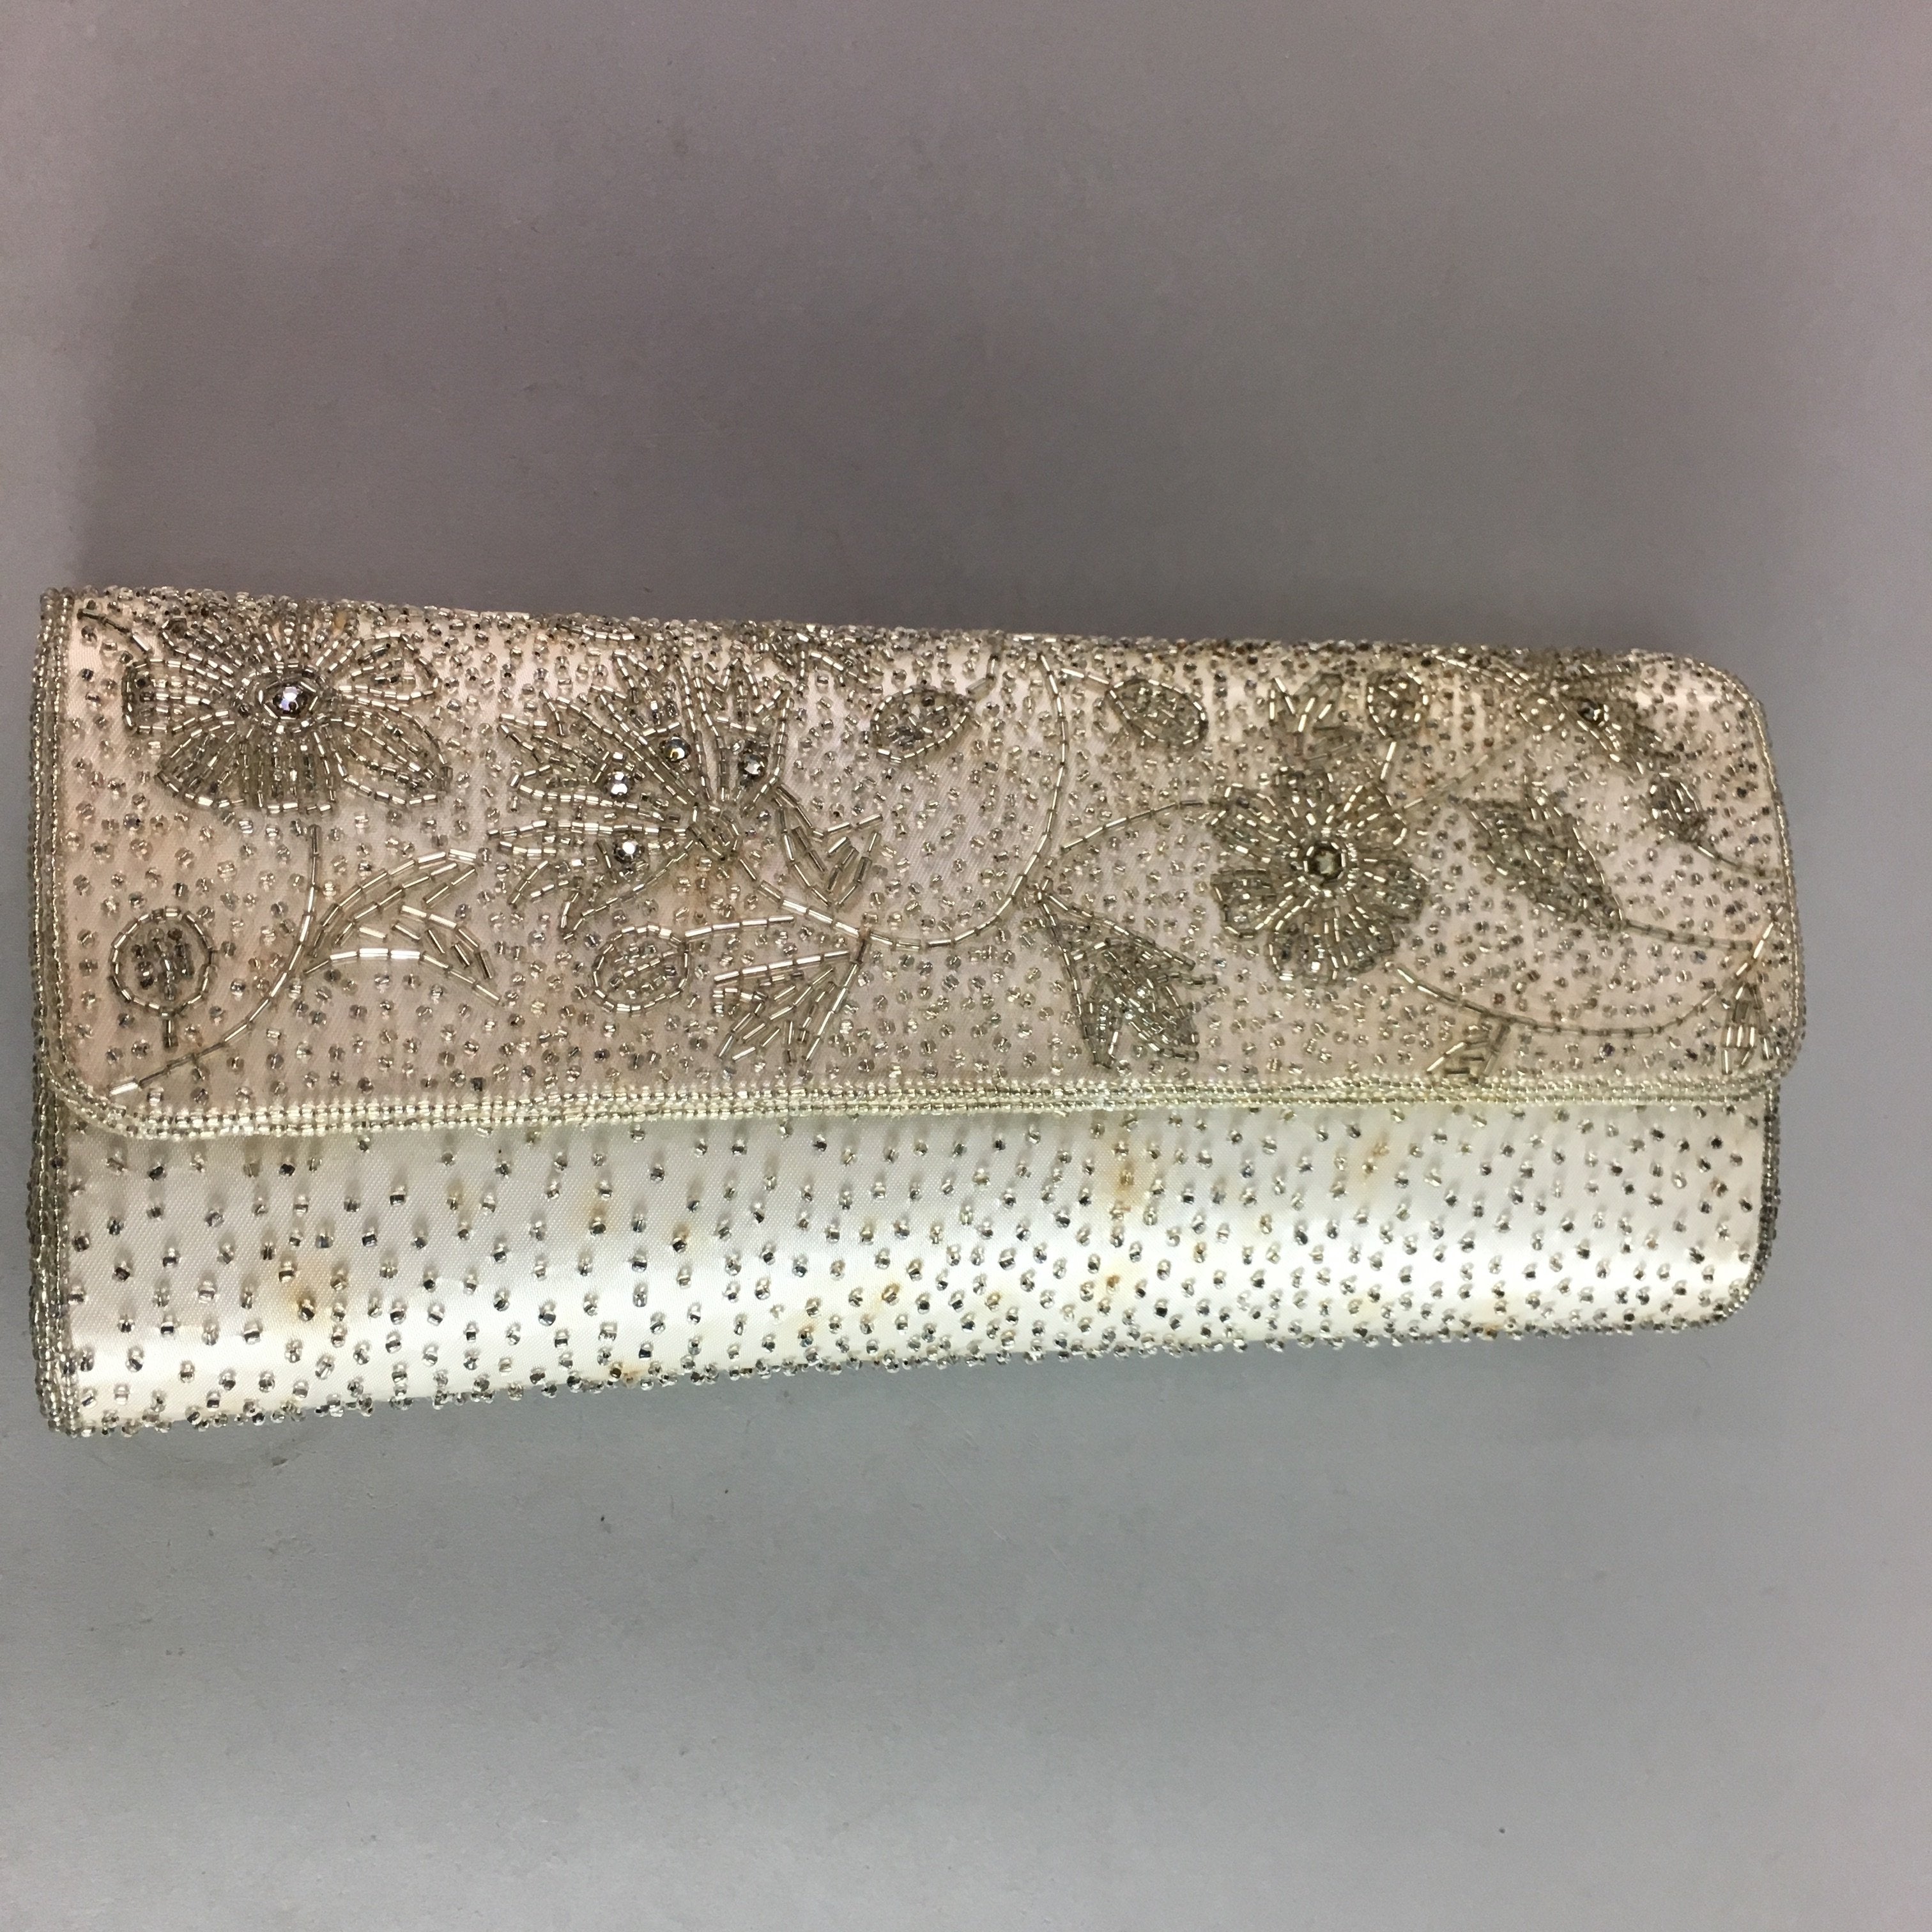 Sequin & Rhinestone Evening Bag - Available in Black, Gold or Silver -  Sandsational Sparkle